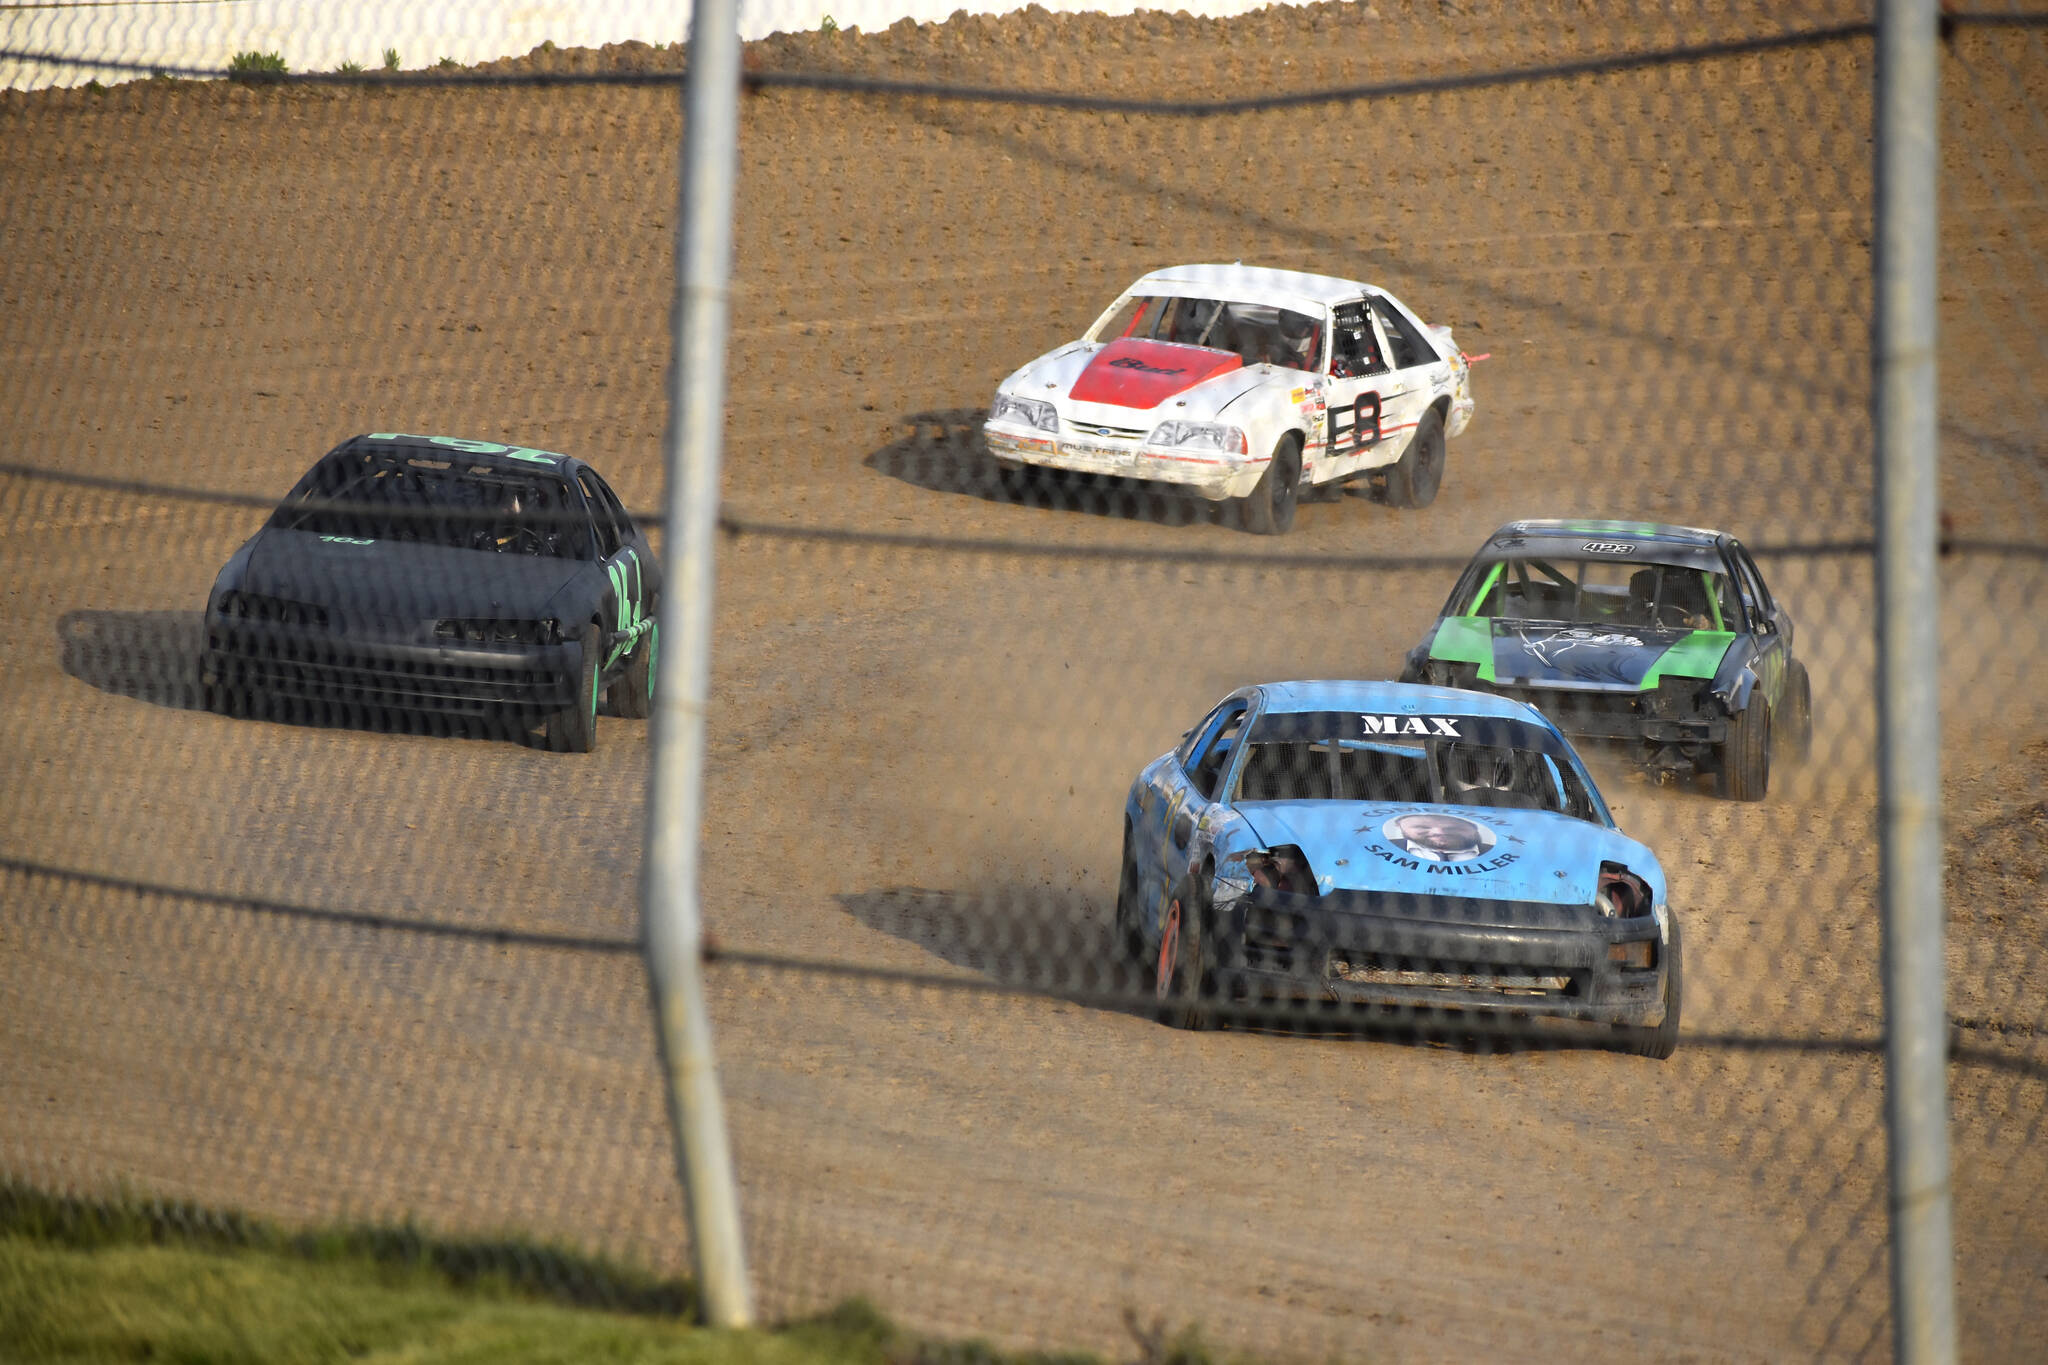 IMCA Modifieds (pictured) will be one of the three varieties of car classes that will be competing in the Timber Cup races over Memorial Day weekend. Tickets start at $28 and can be obtained in-person at the raceway gates or online. (Allen Leister l The Daily World)